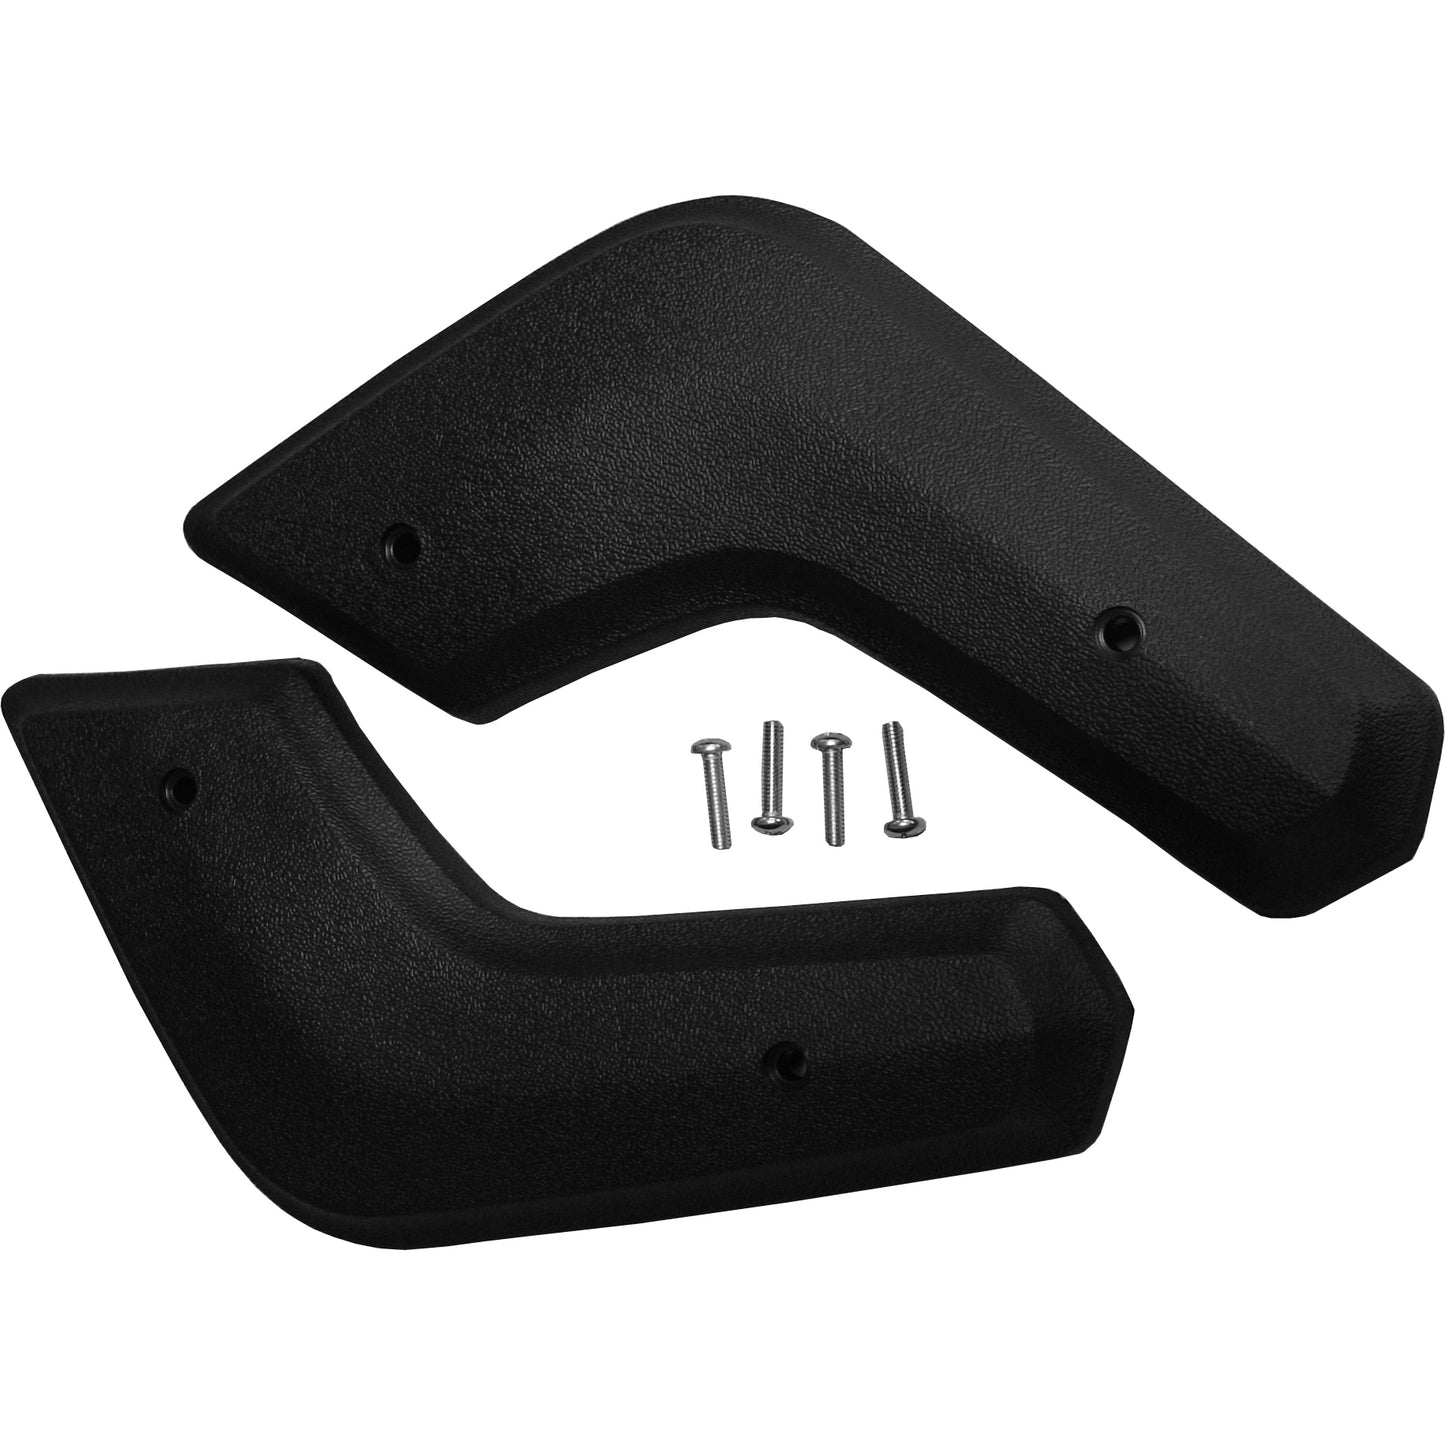 68/70 BENCH HINGE COVERS - BLK